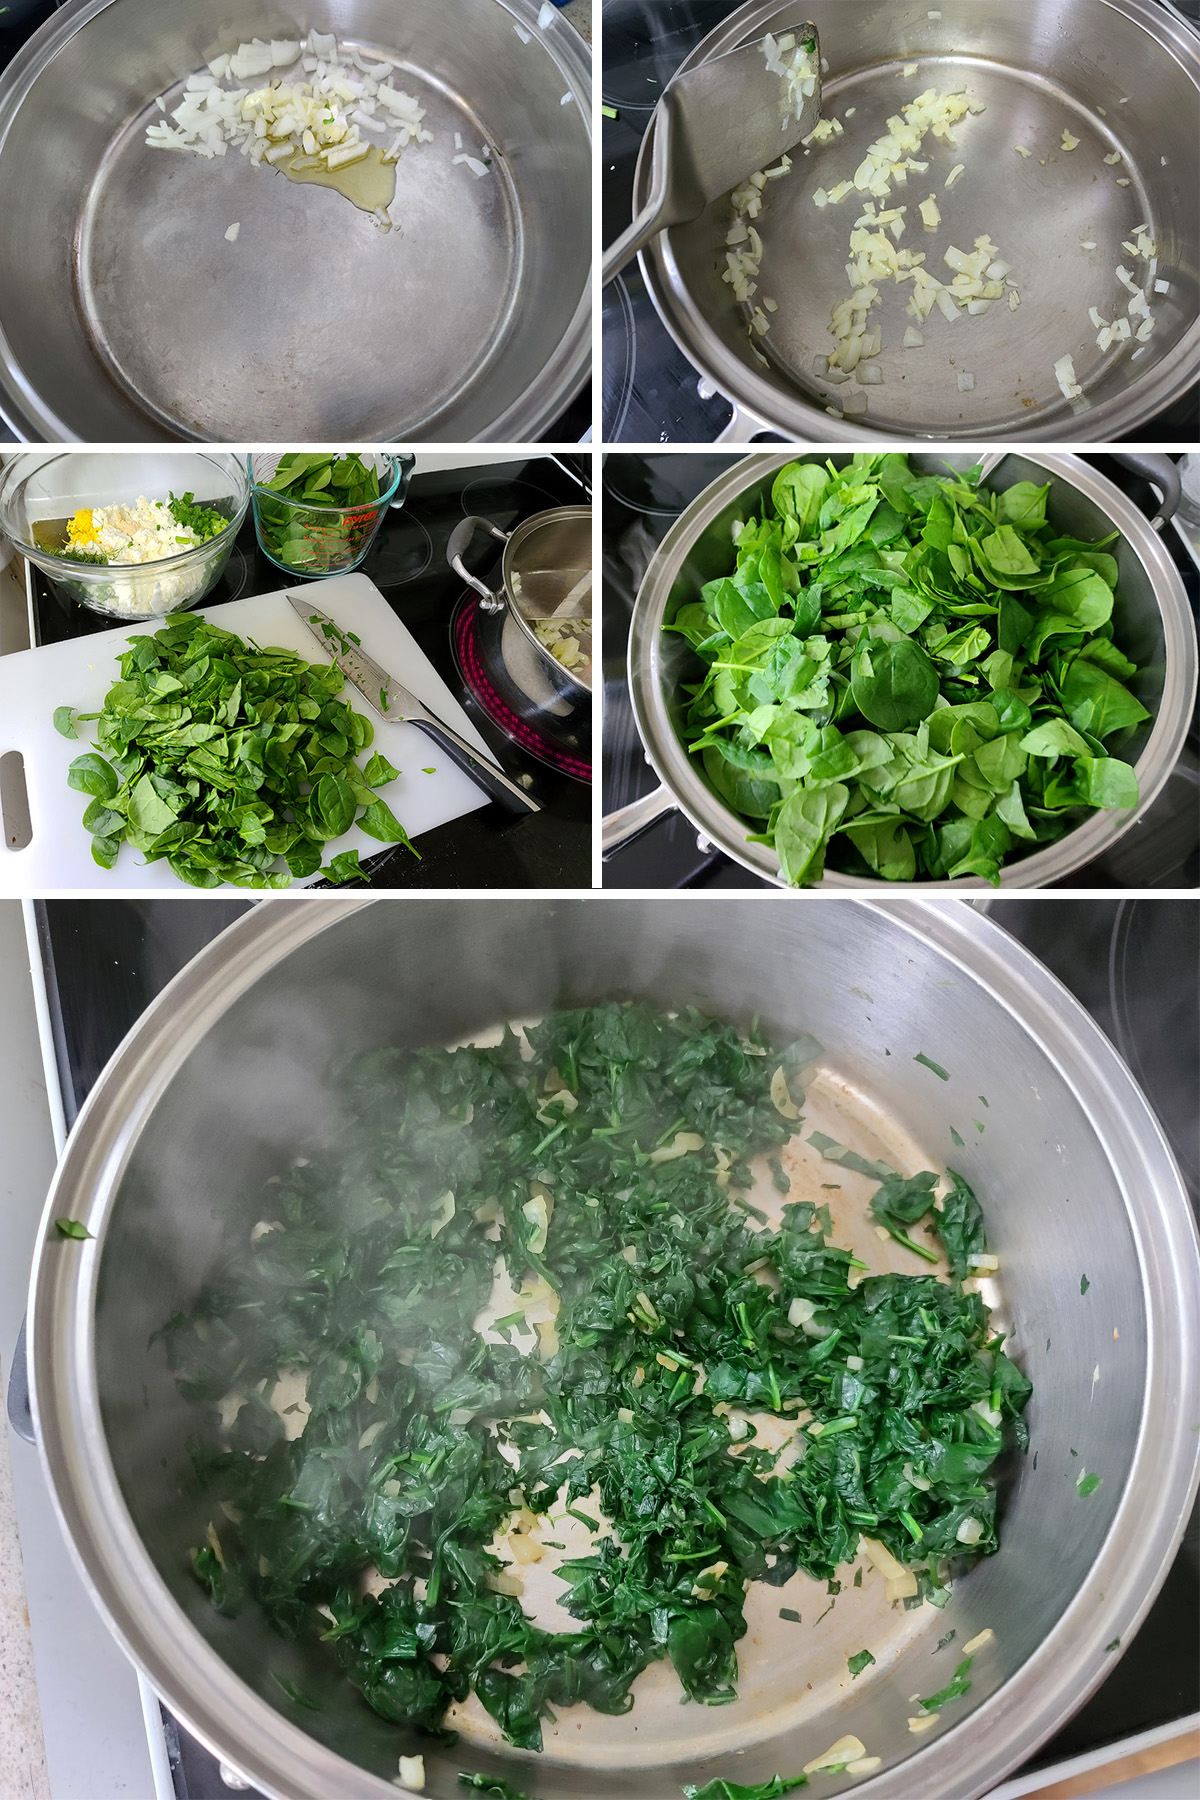 A 5 part image showing the onion and spinach being cooked in a large pan.